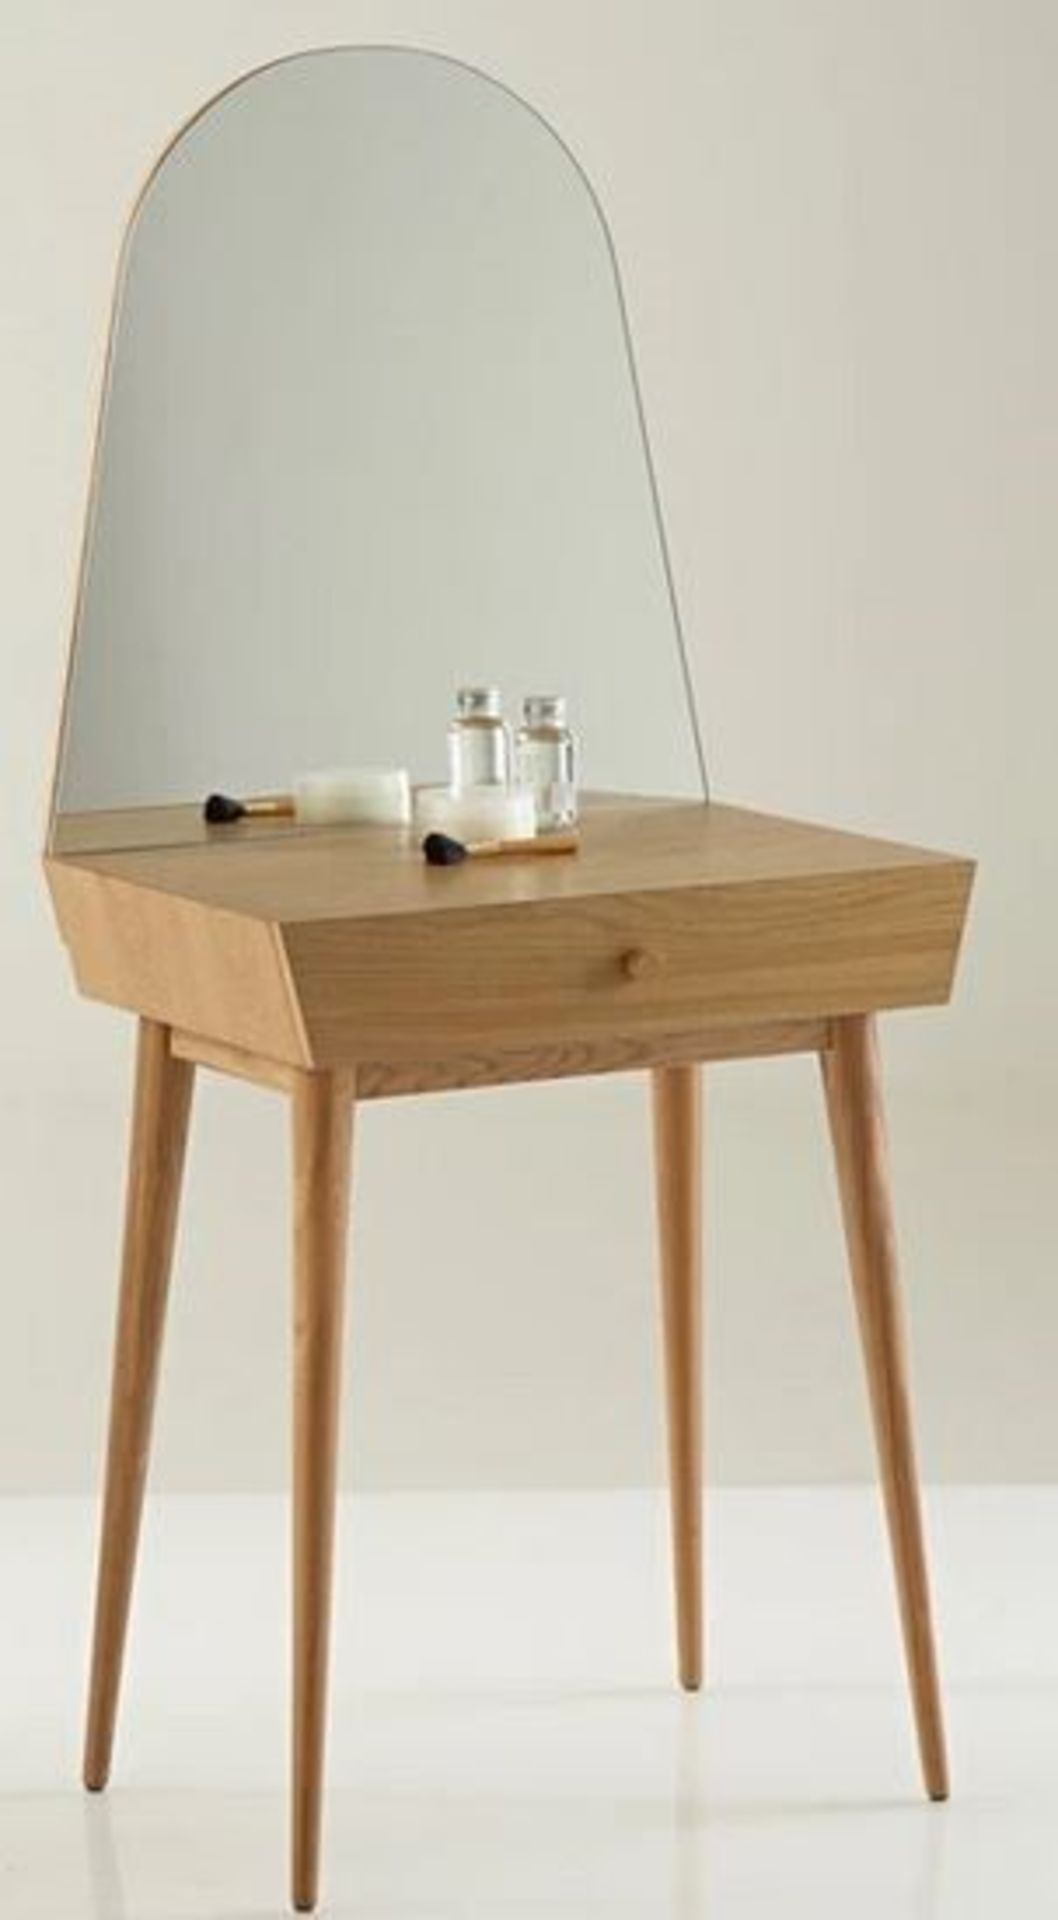 1 GRADE B BOXED DESIGNER CLAIROY 1 DRAWER SCANDI STYLE DRESSING TABLE IN OAK / RRP £165.00 (PUBLIC